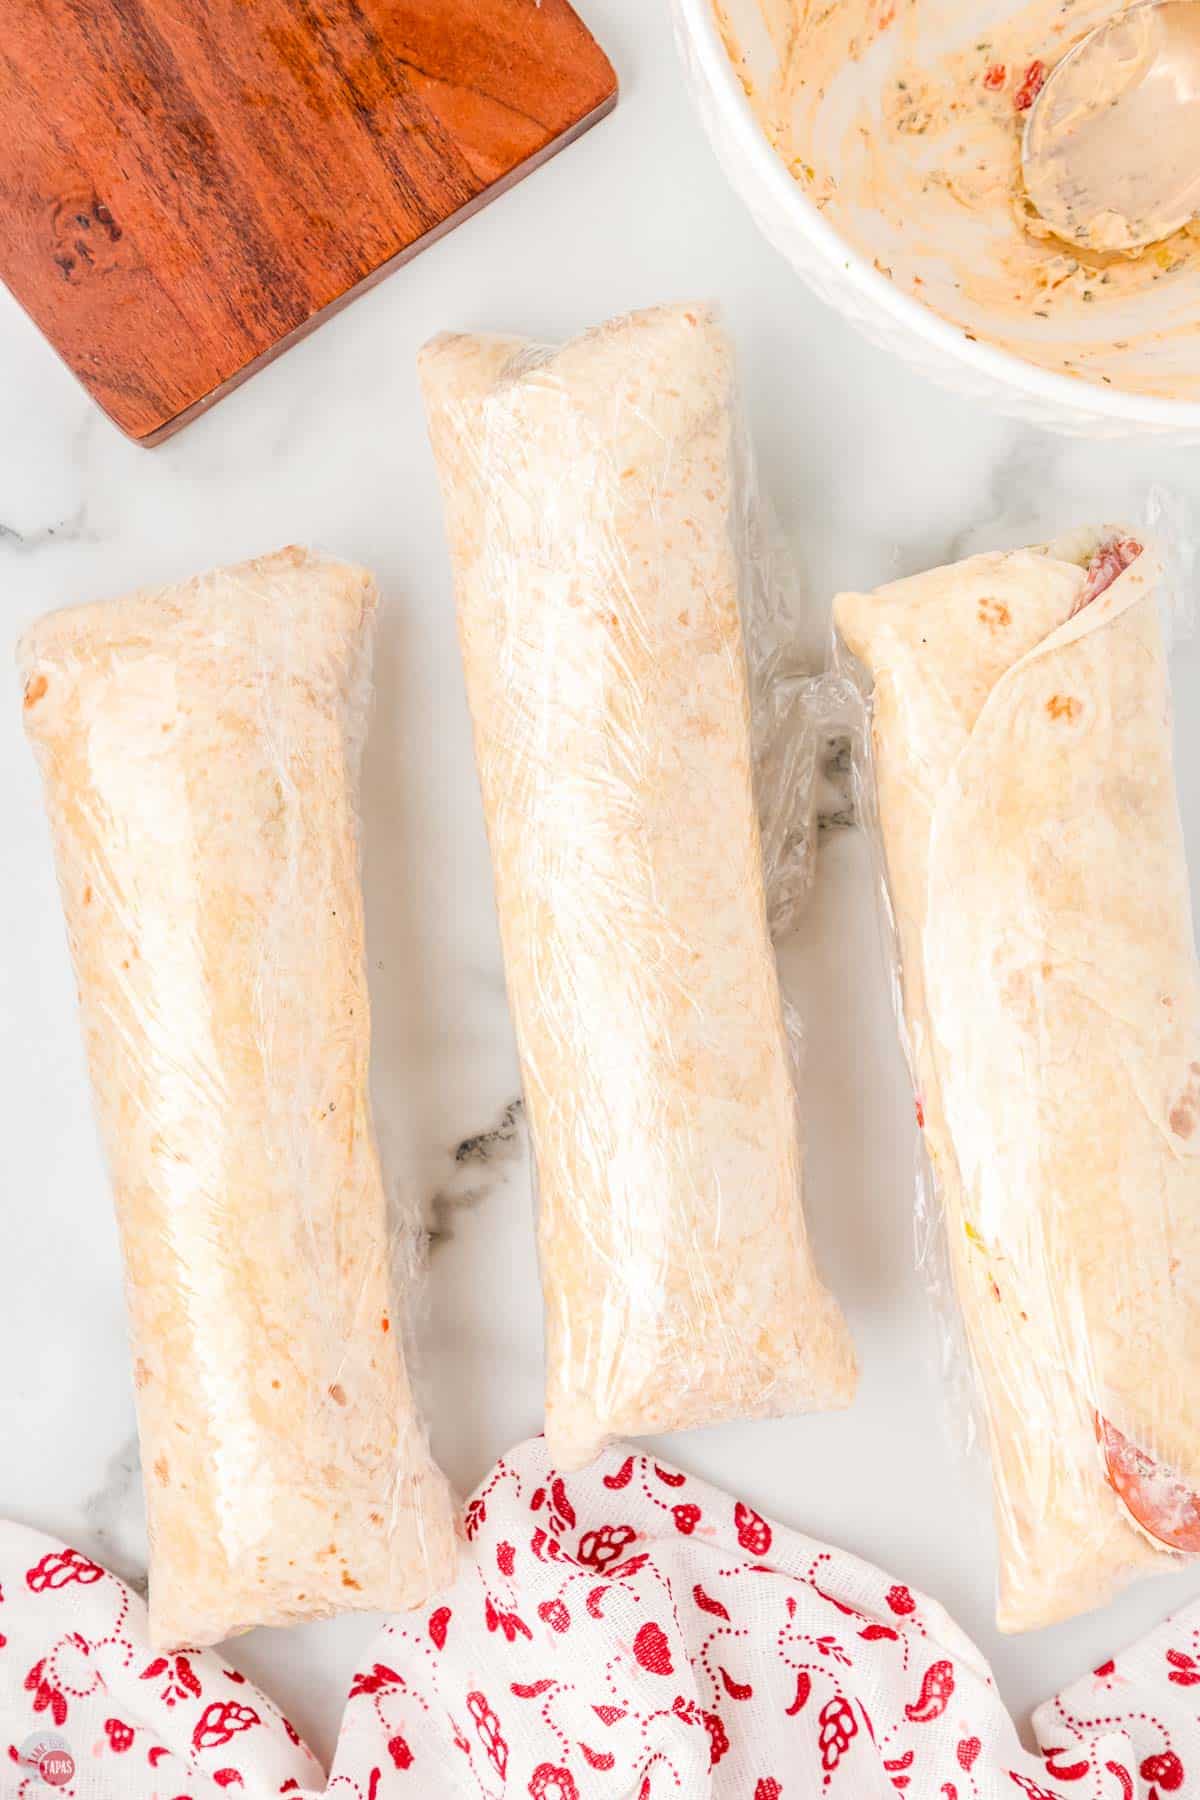 tortilla roll-ups wrapped in plastic wrap